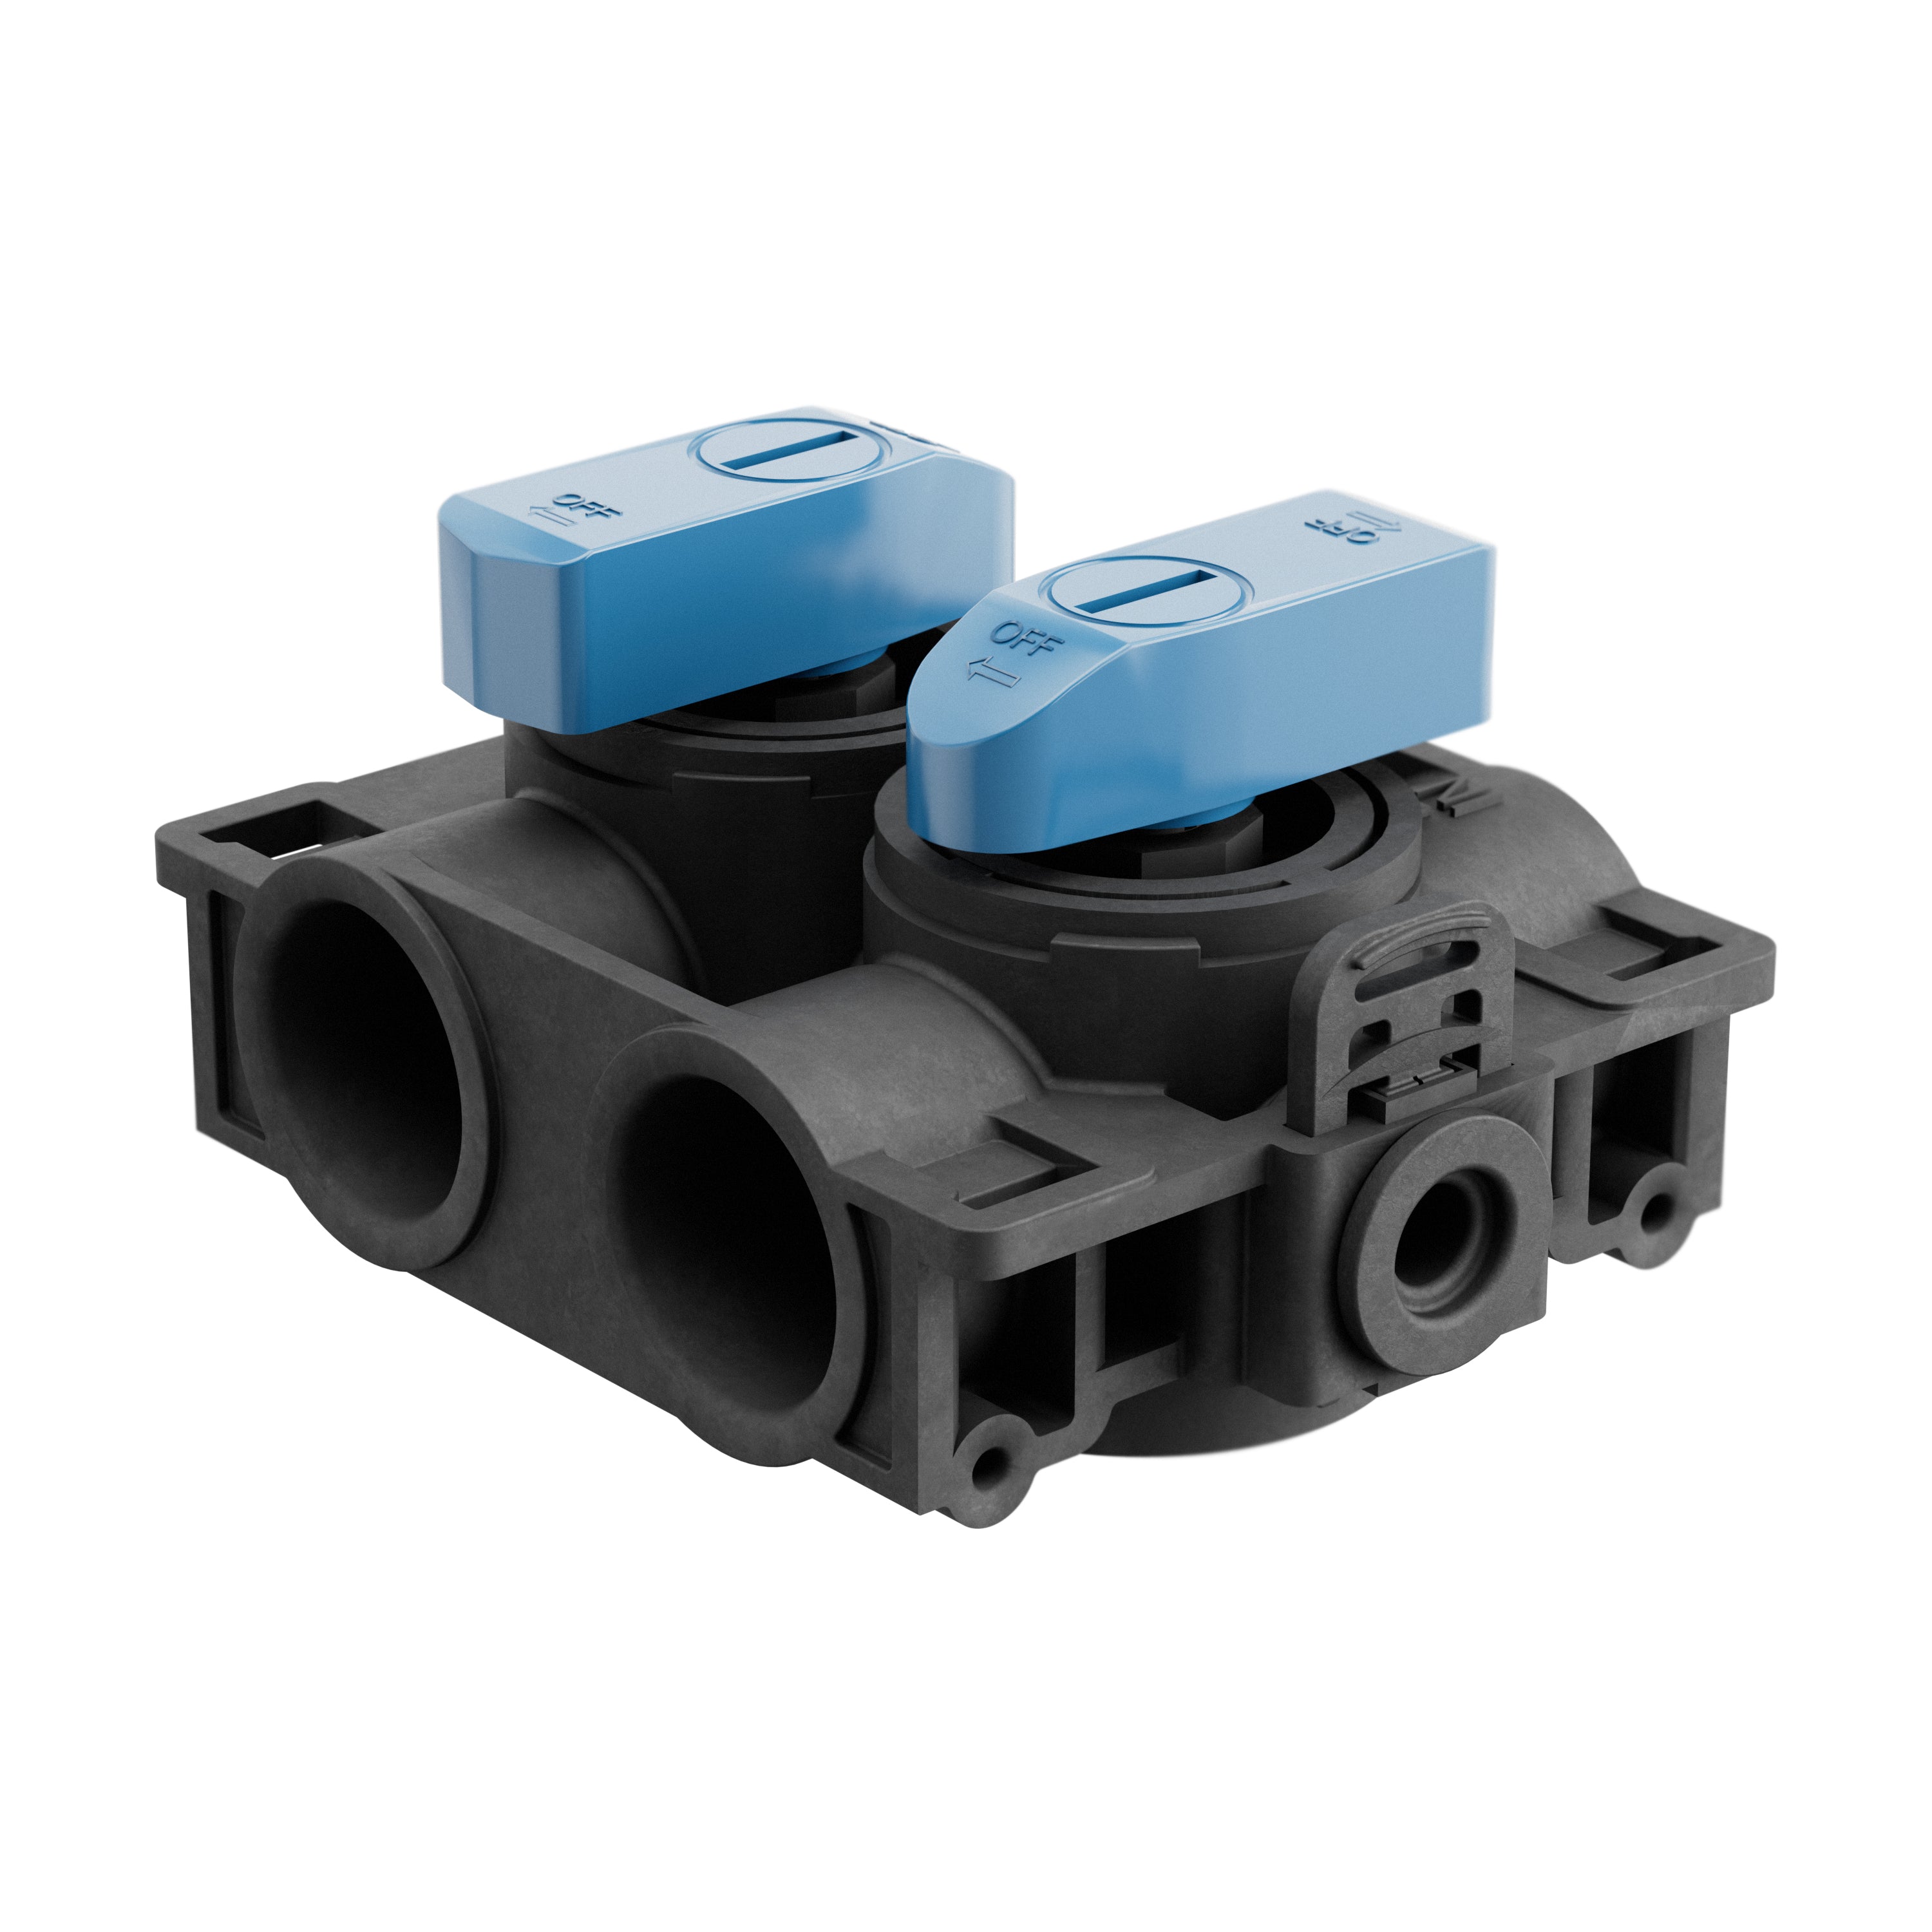 3/4" Plastic Bypass Valve for Water Softener/Filtration Systems